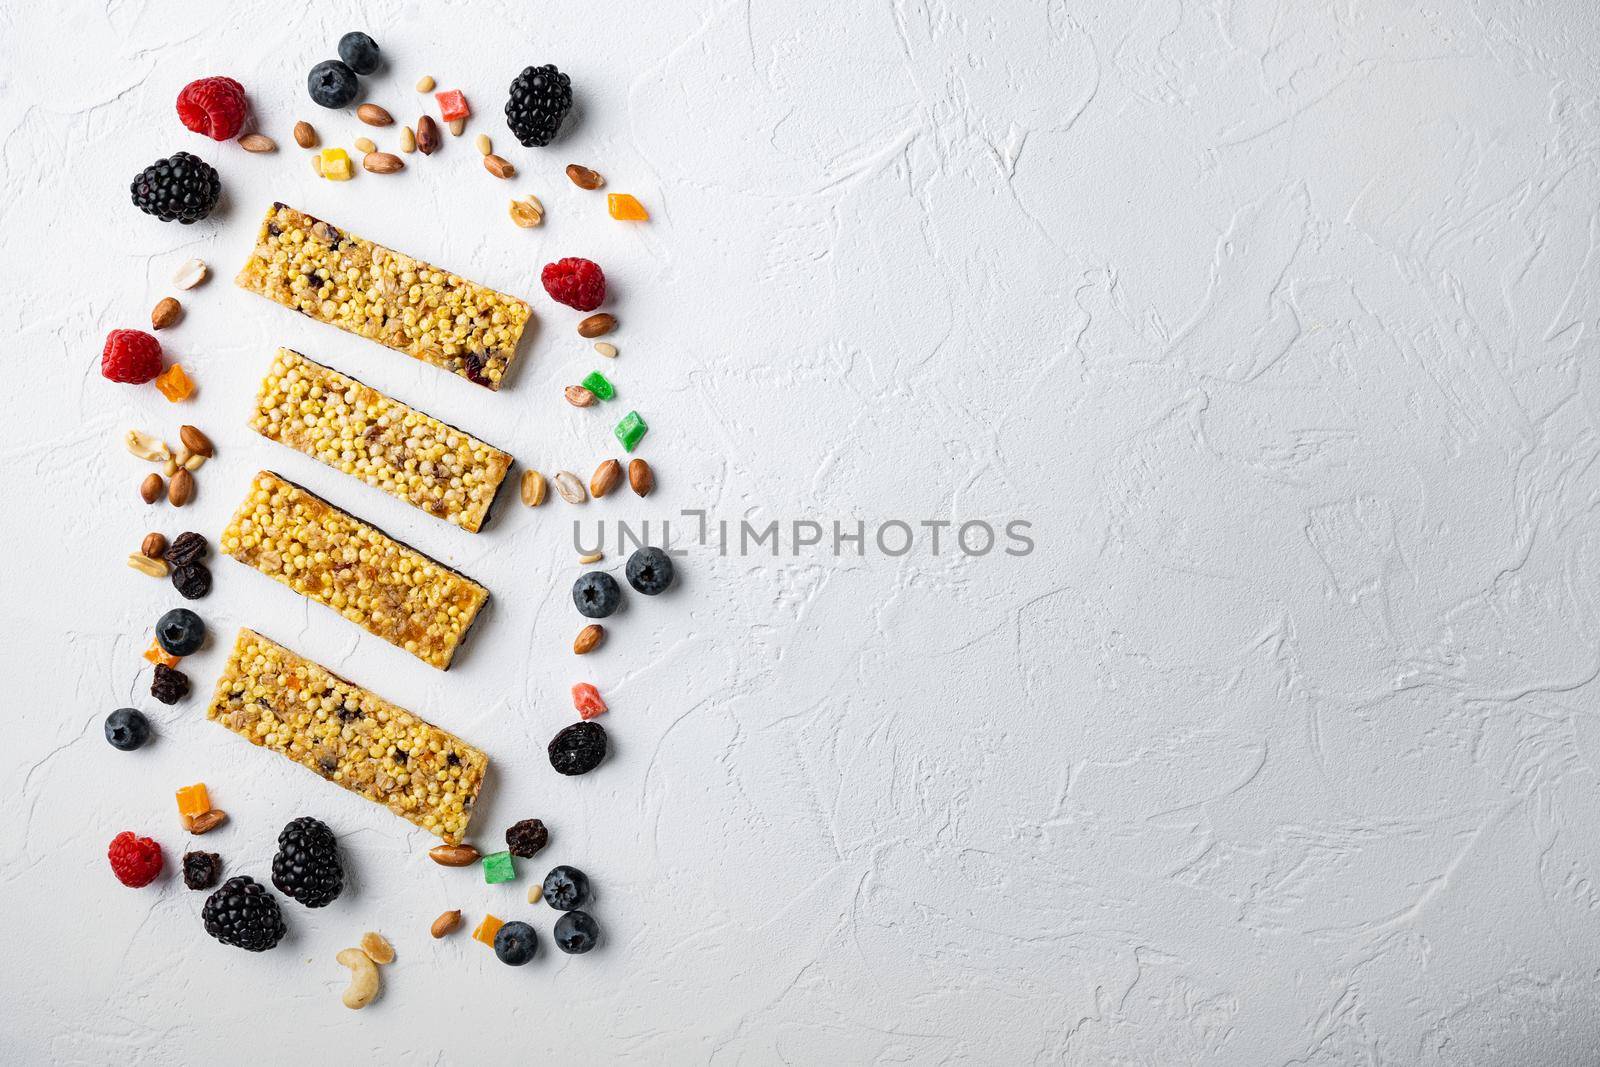 Healthy snacks, fitness lifestyle and fiber diet concept, top view with copy space, on white background